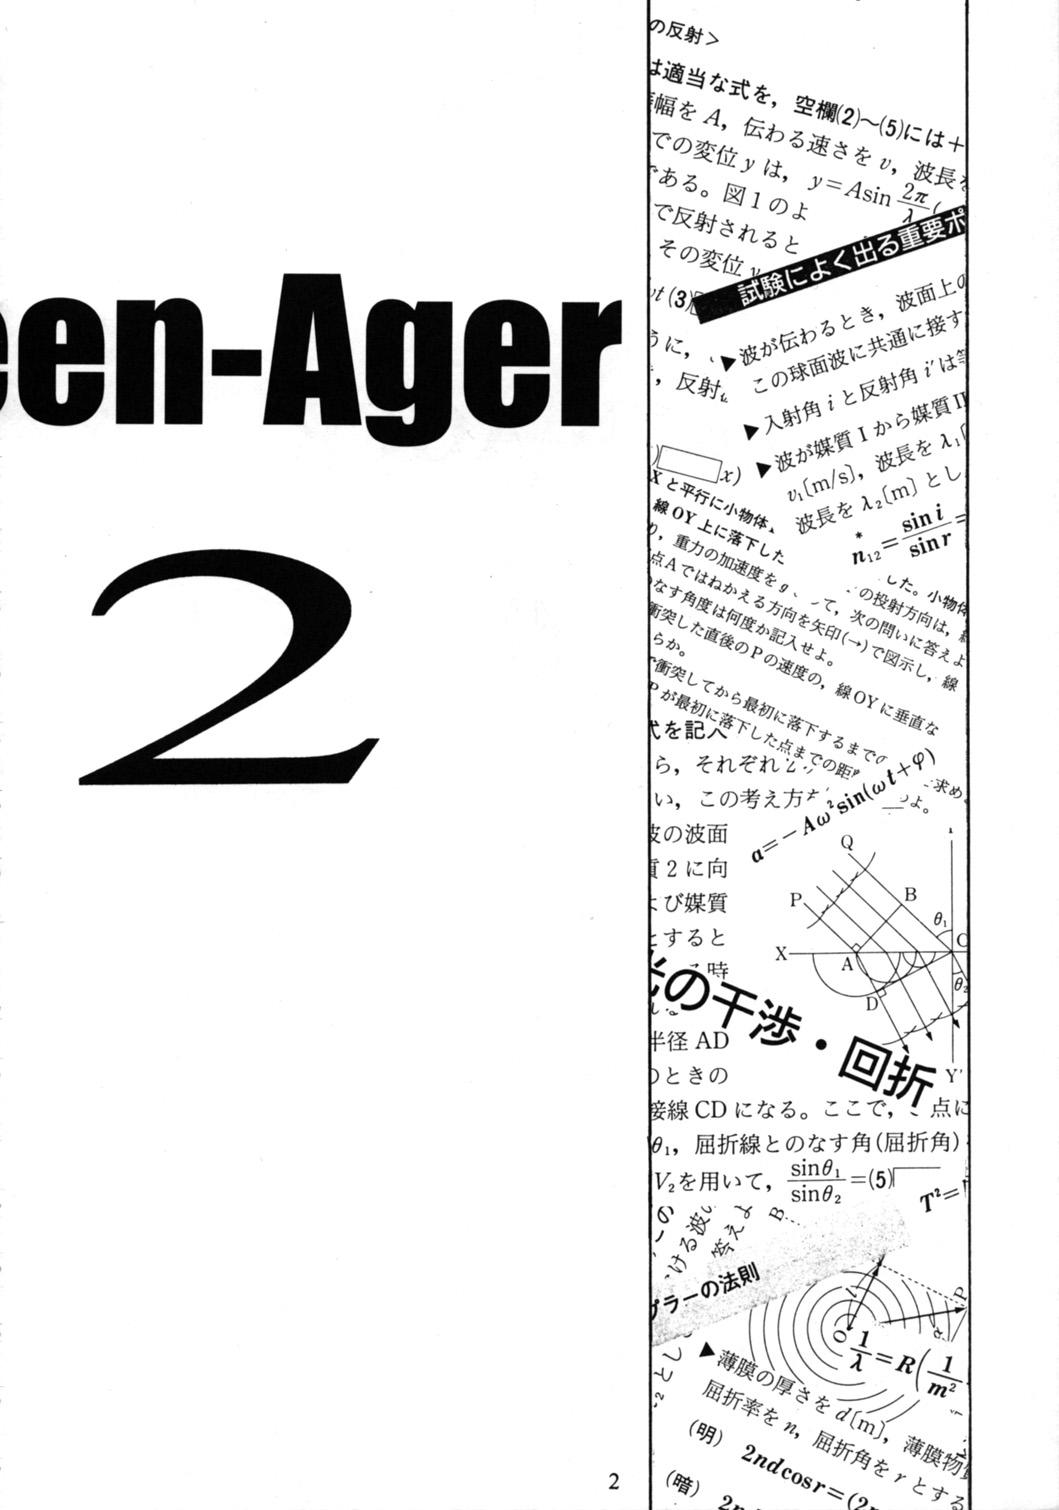 Teen-Ager 2 2